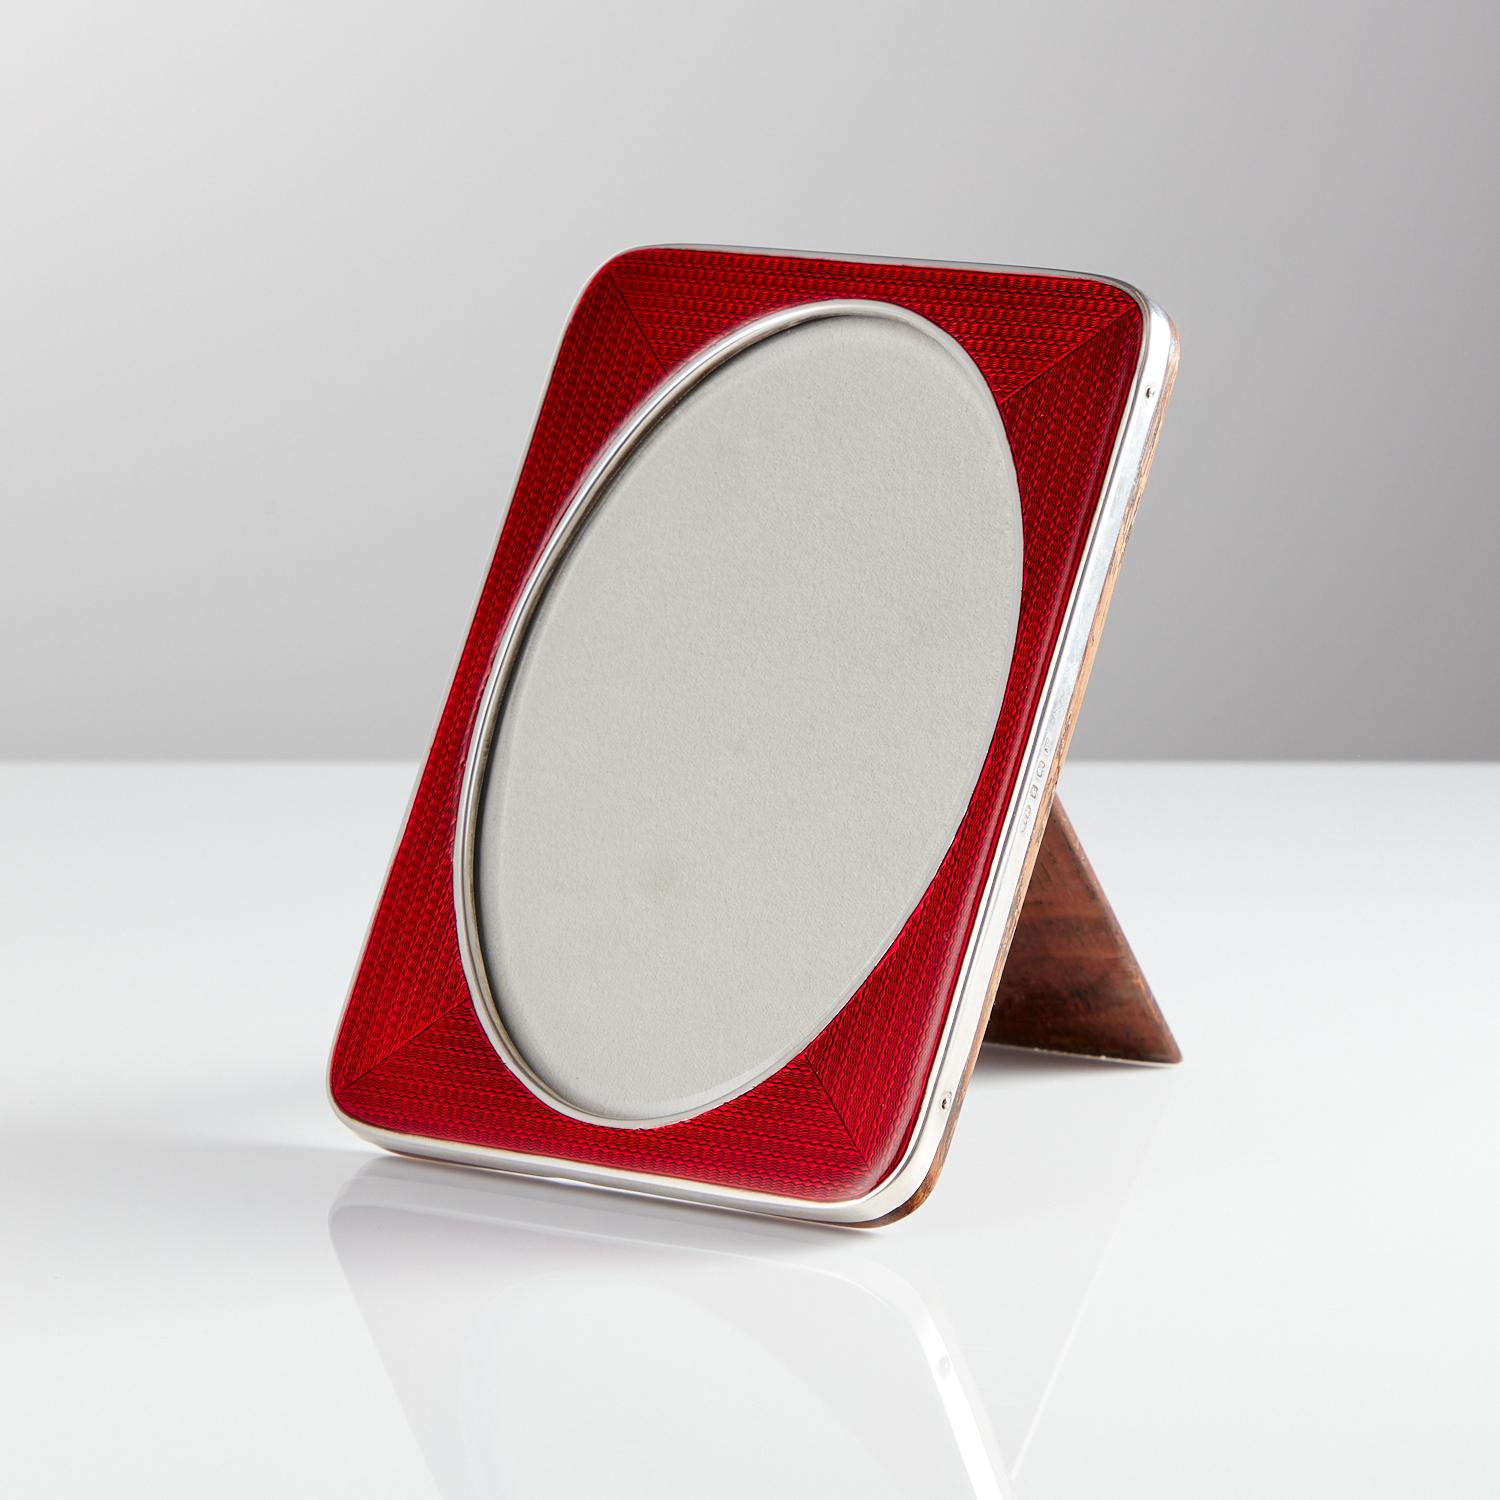 Art Deco sterling silver & enamel picture frame, Birmingham 1921.

An extraordinary Art Deco sterling silver and red enamel picture frame, by Sanders & Mackenzie. Consisting of a beautiful bold and translucent coloured red enamel frame and english